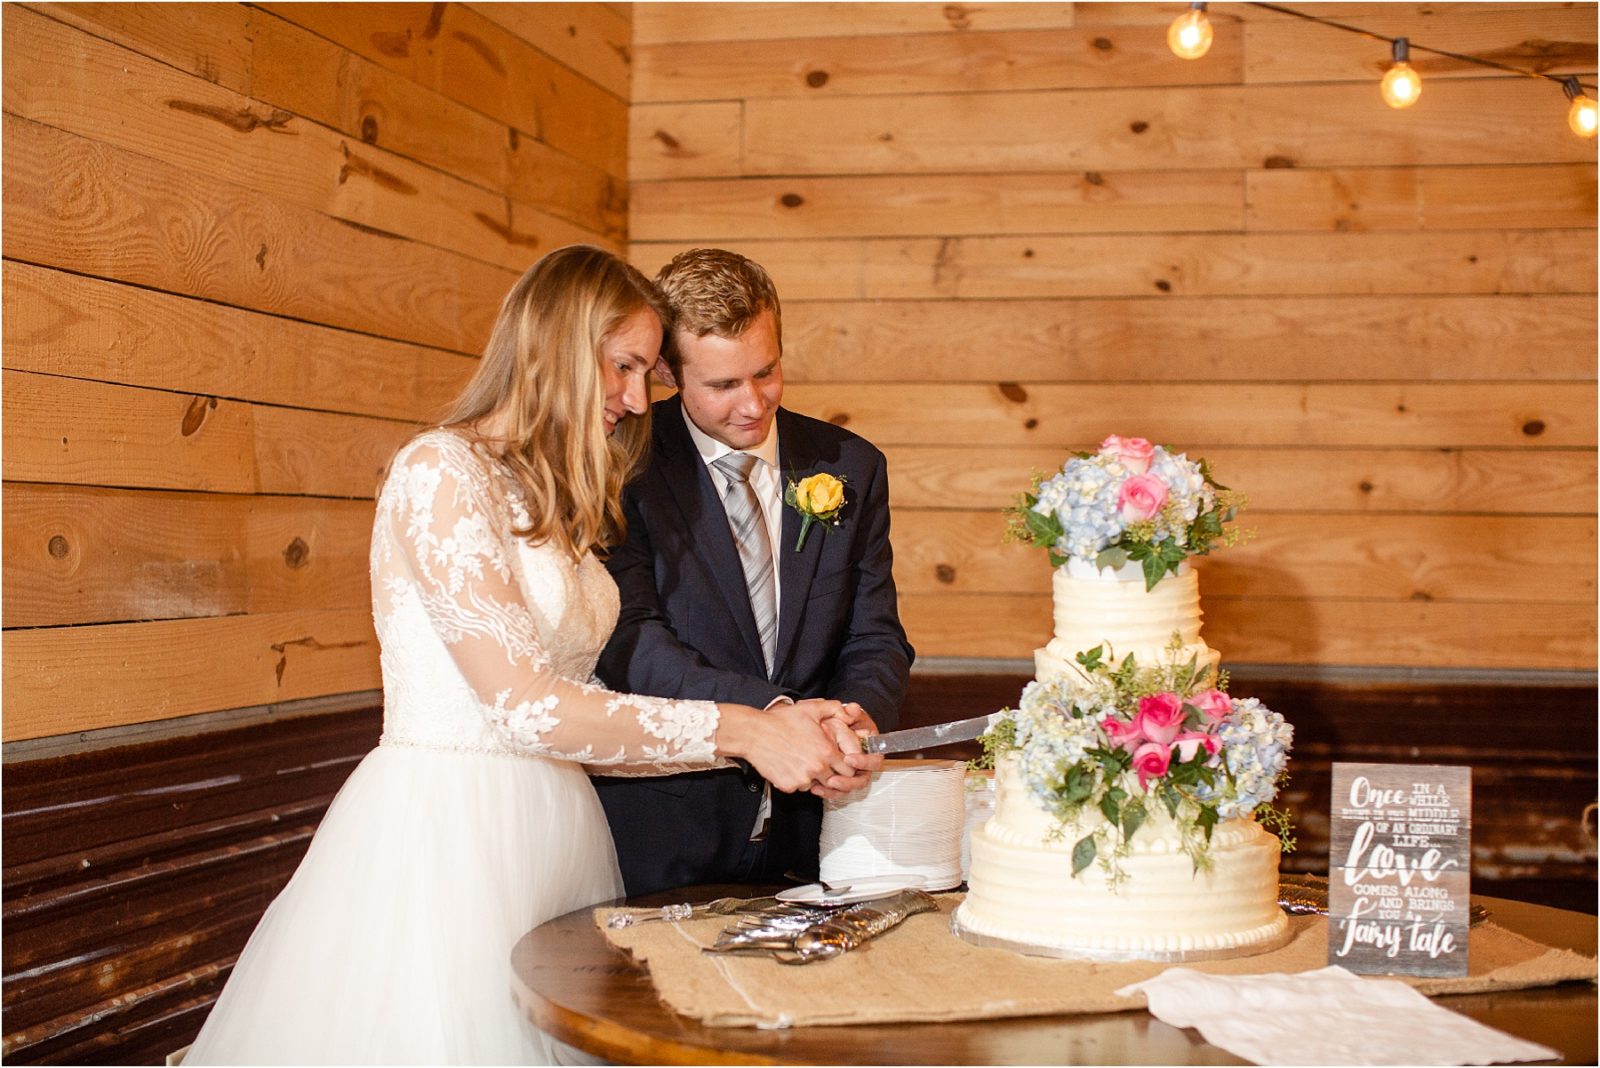 Married couple holding knife together to cut wedding cake